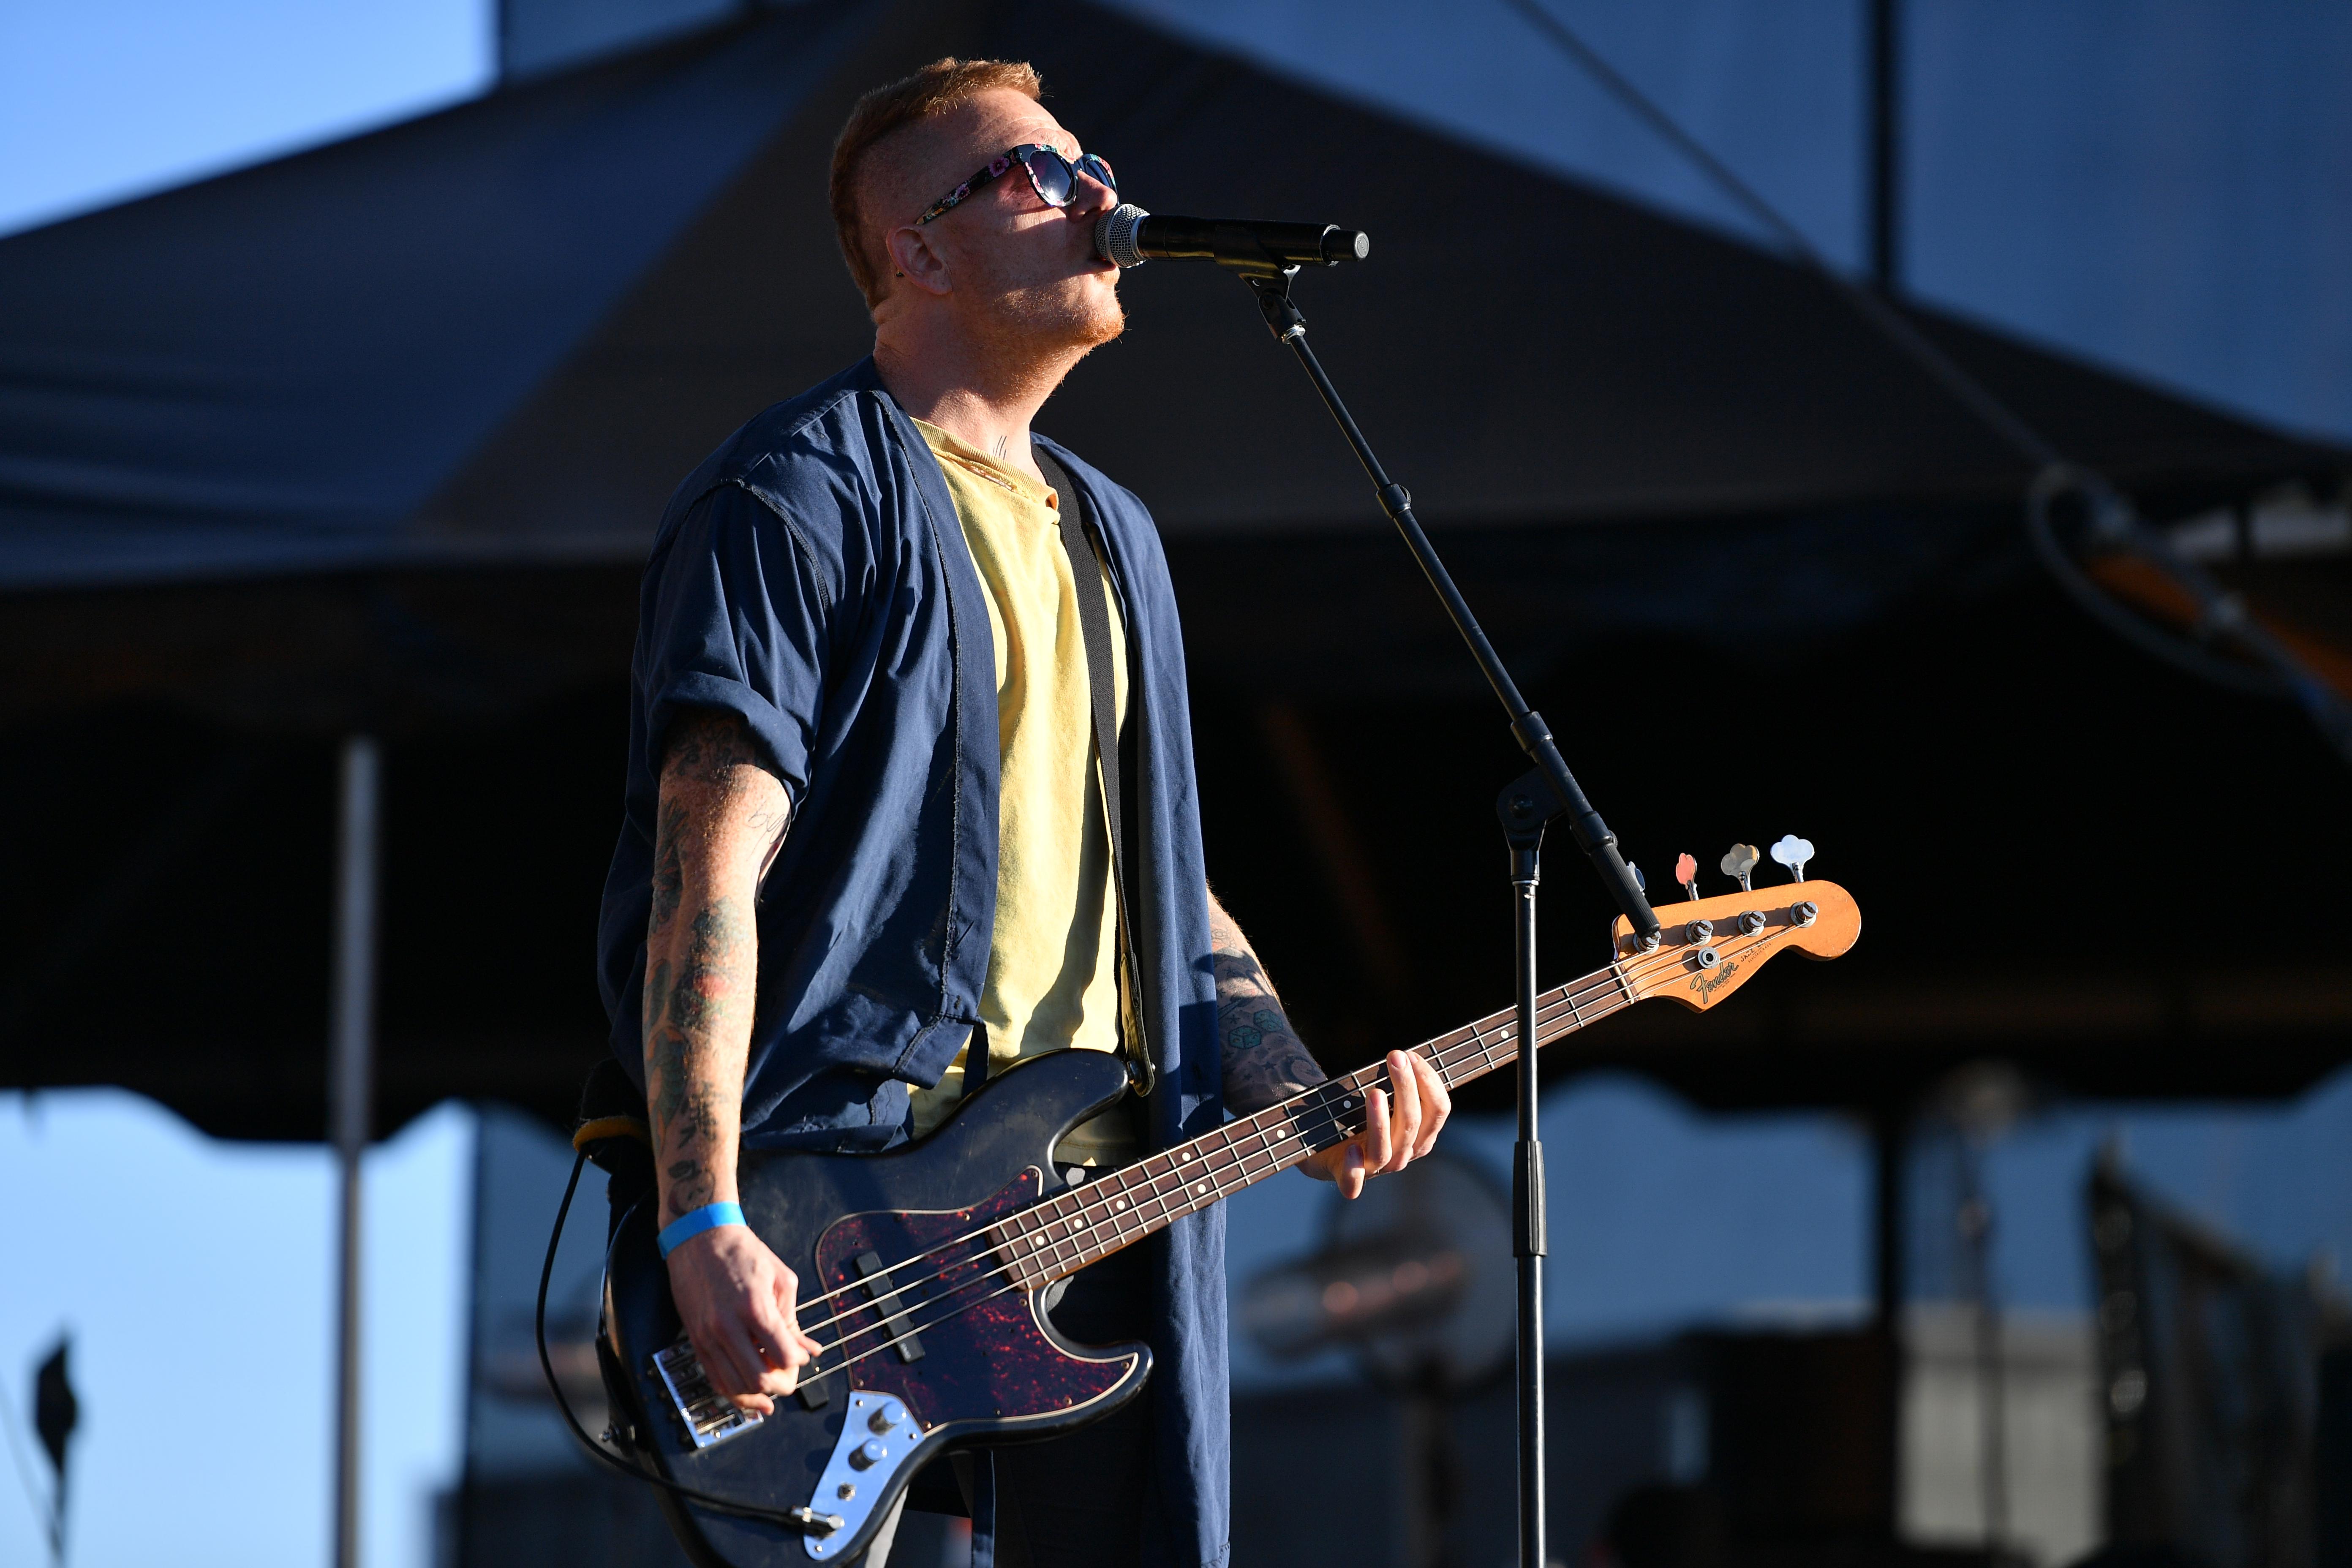 A man wearing a blue button-down shirt over a yellow T-shirt stands onstage playing a bass and singing into a microphone.